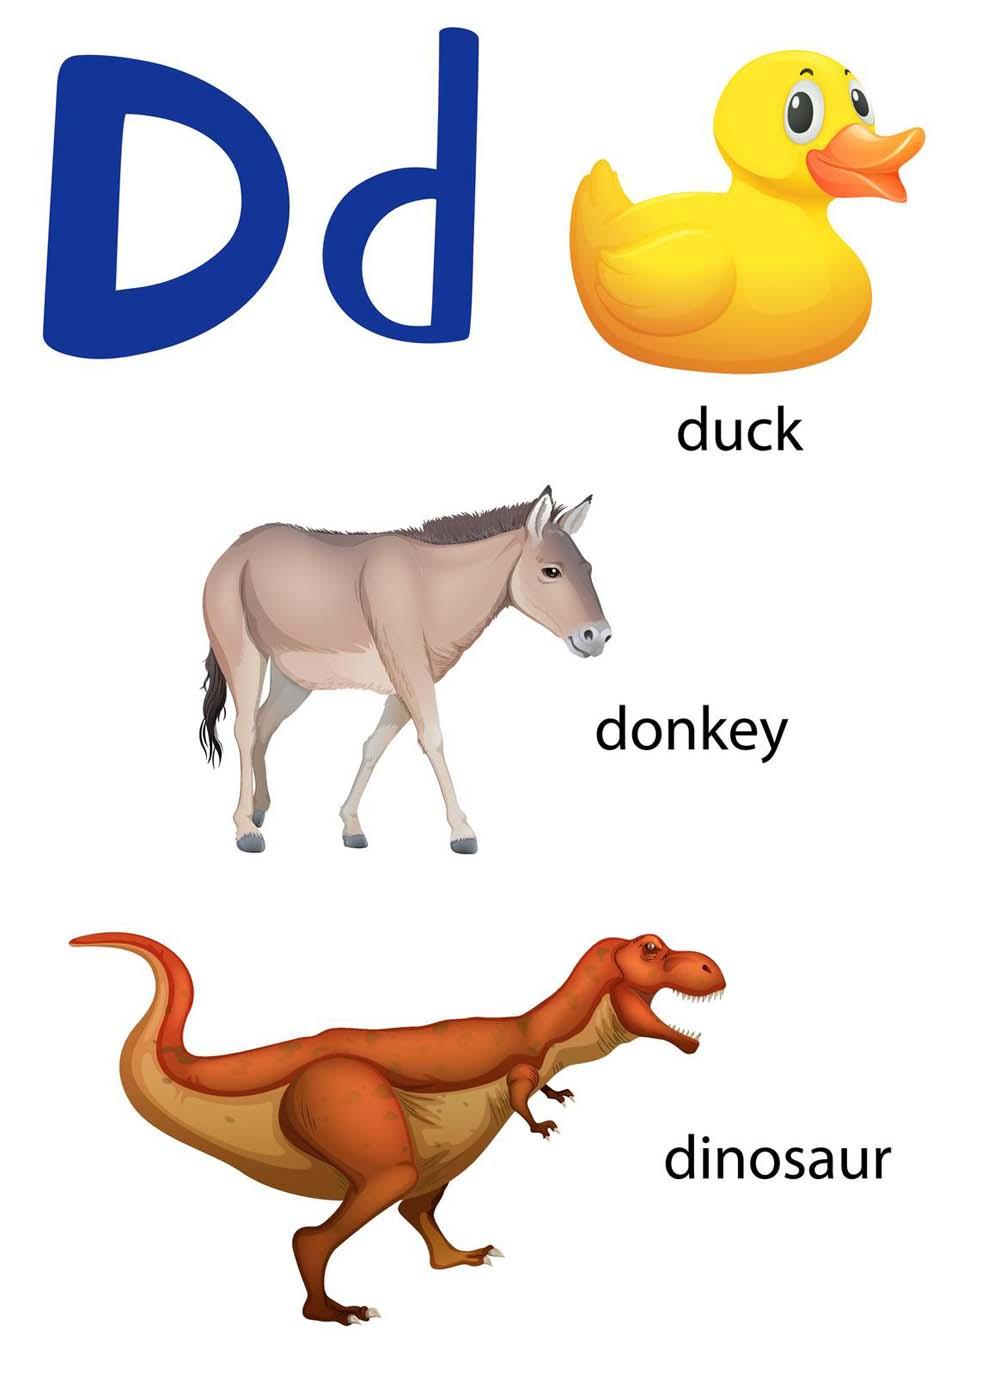 Learn Capital and Small Letter D using our Picture Worksheets-Worksheets